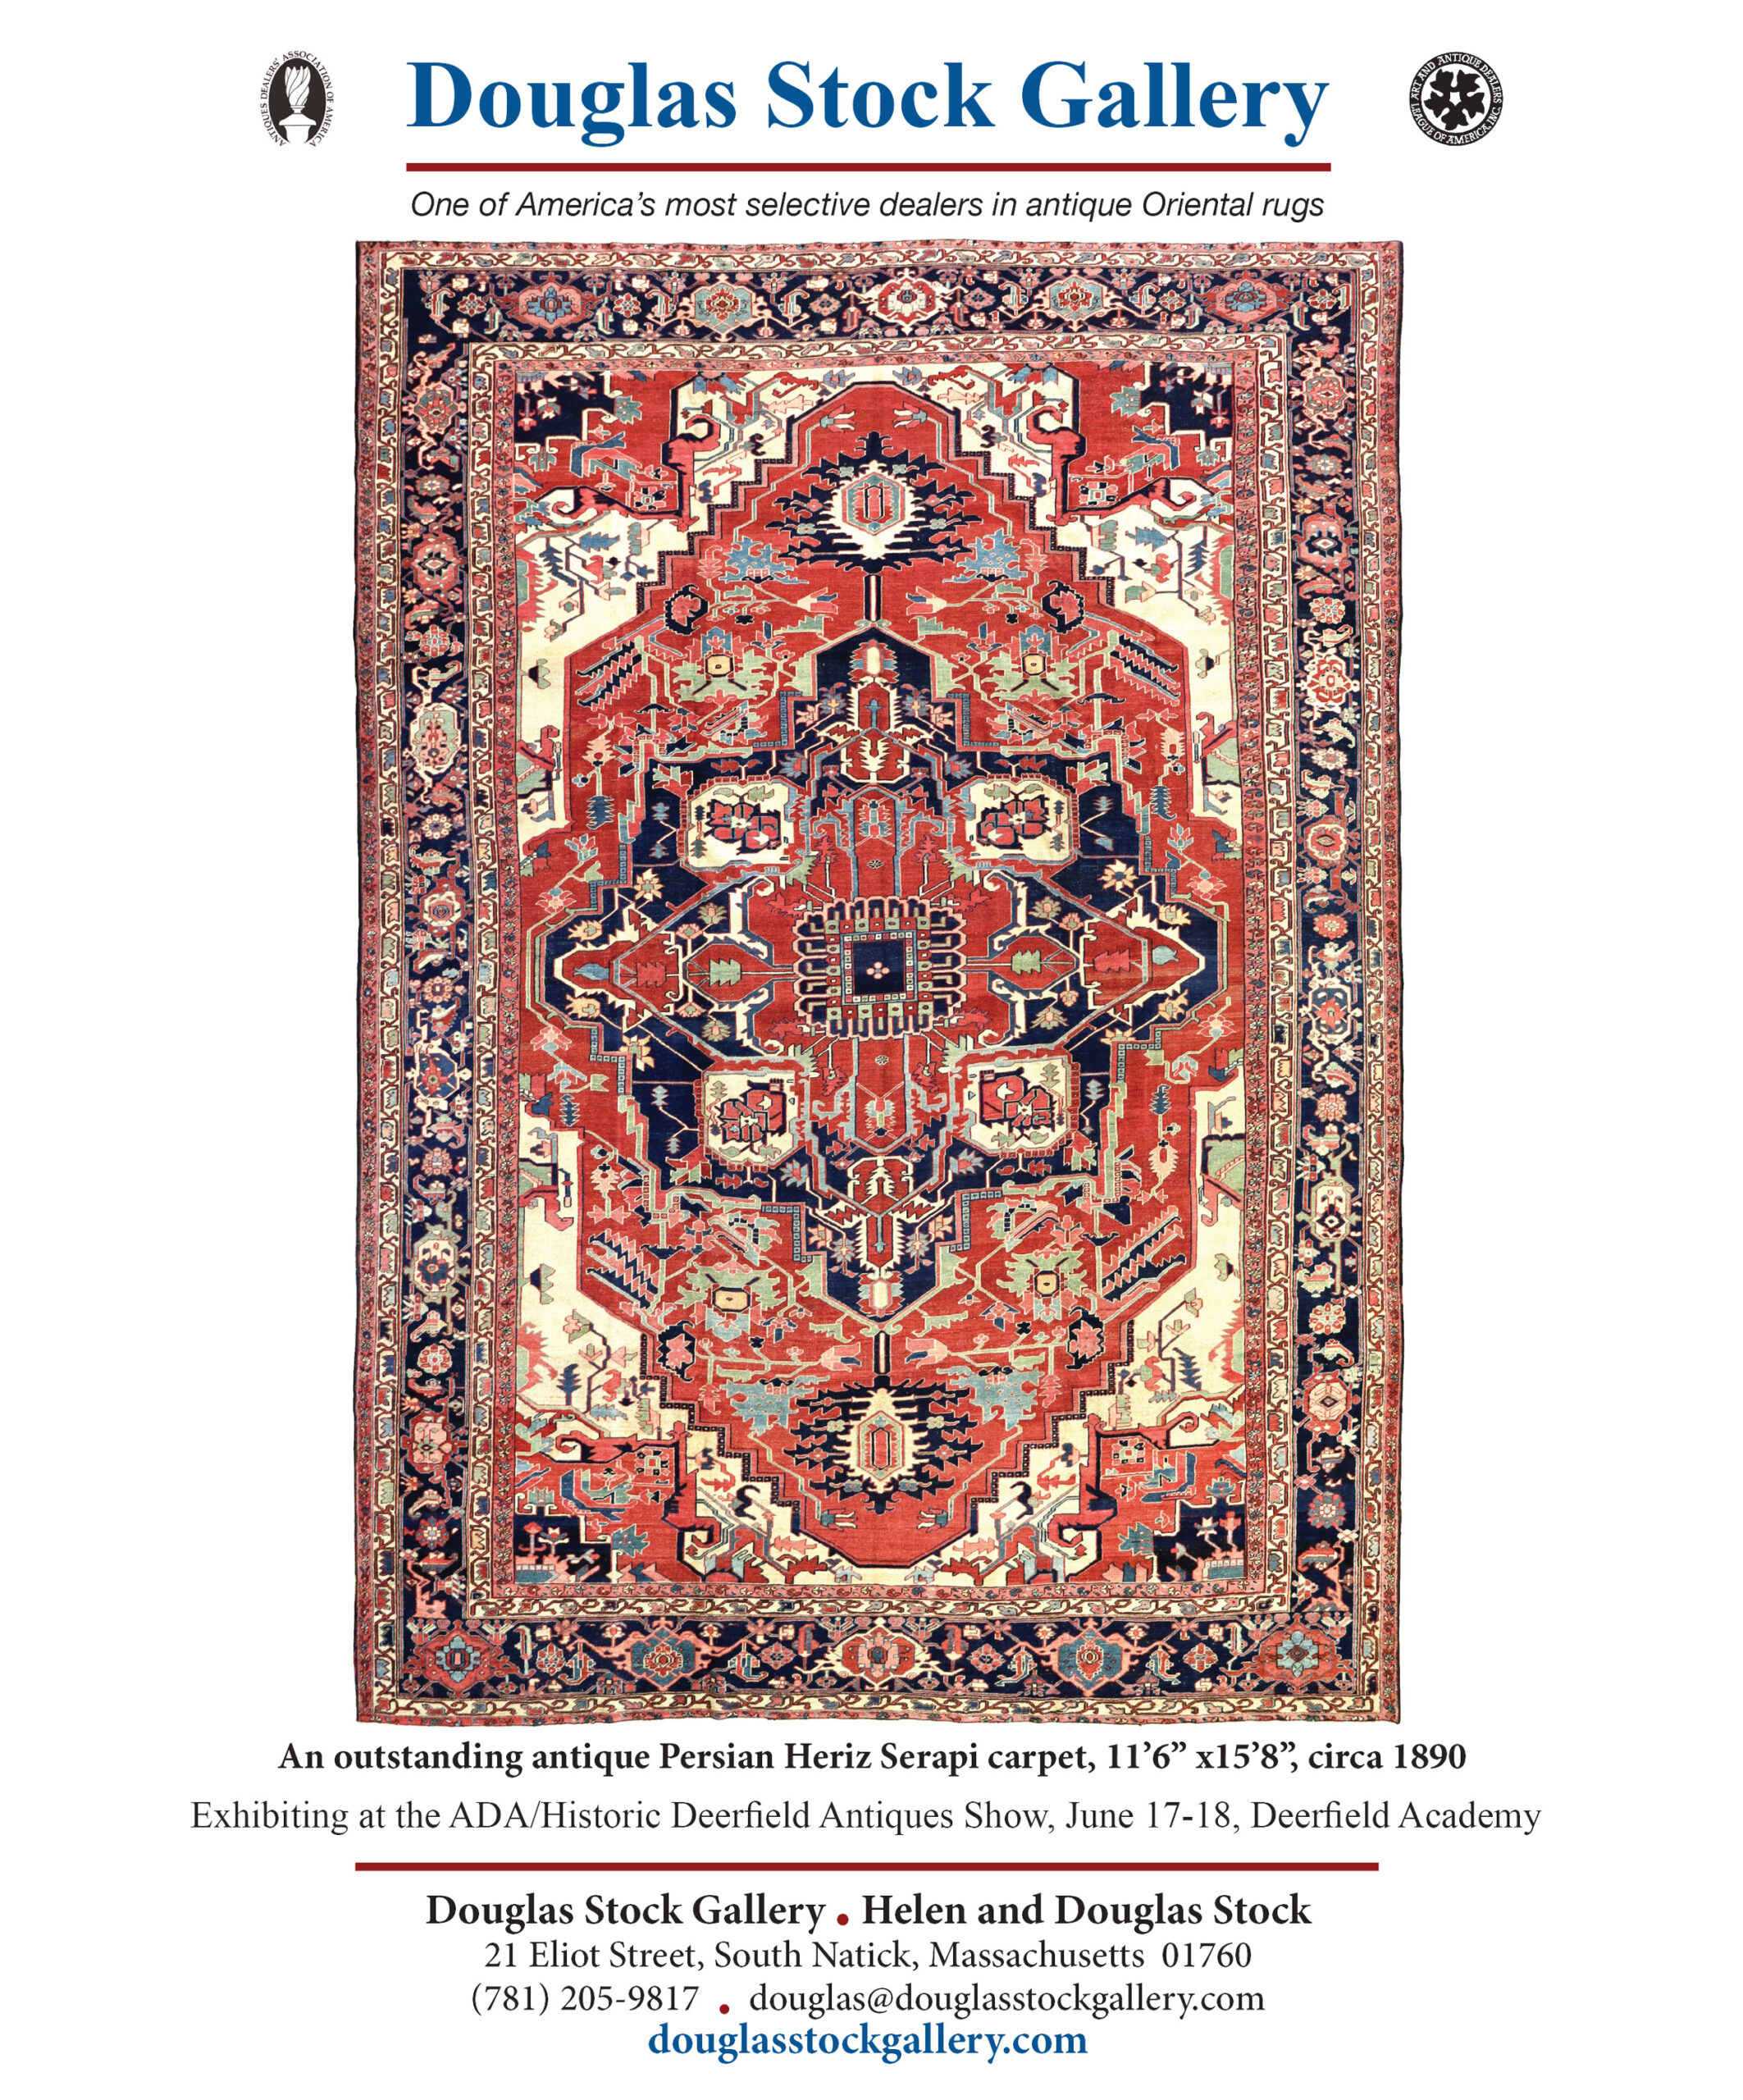 Douglas Stock Gallery advertisement for an antique Persian Heriz "Serapi" carpet in the May / June 2023 issue of The Magazine Antiques